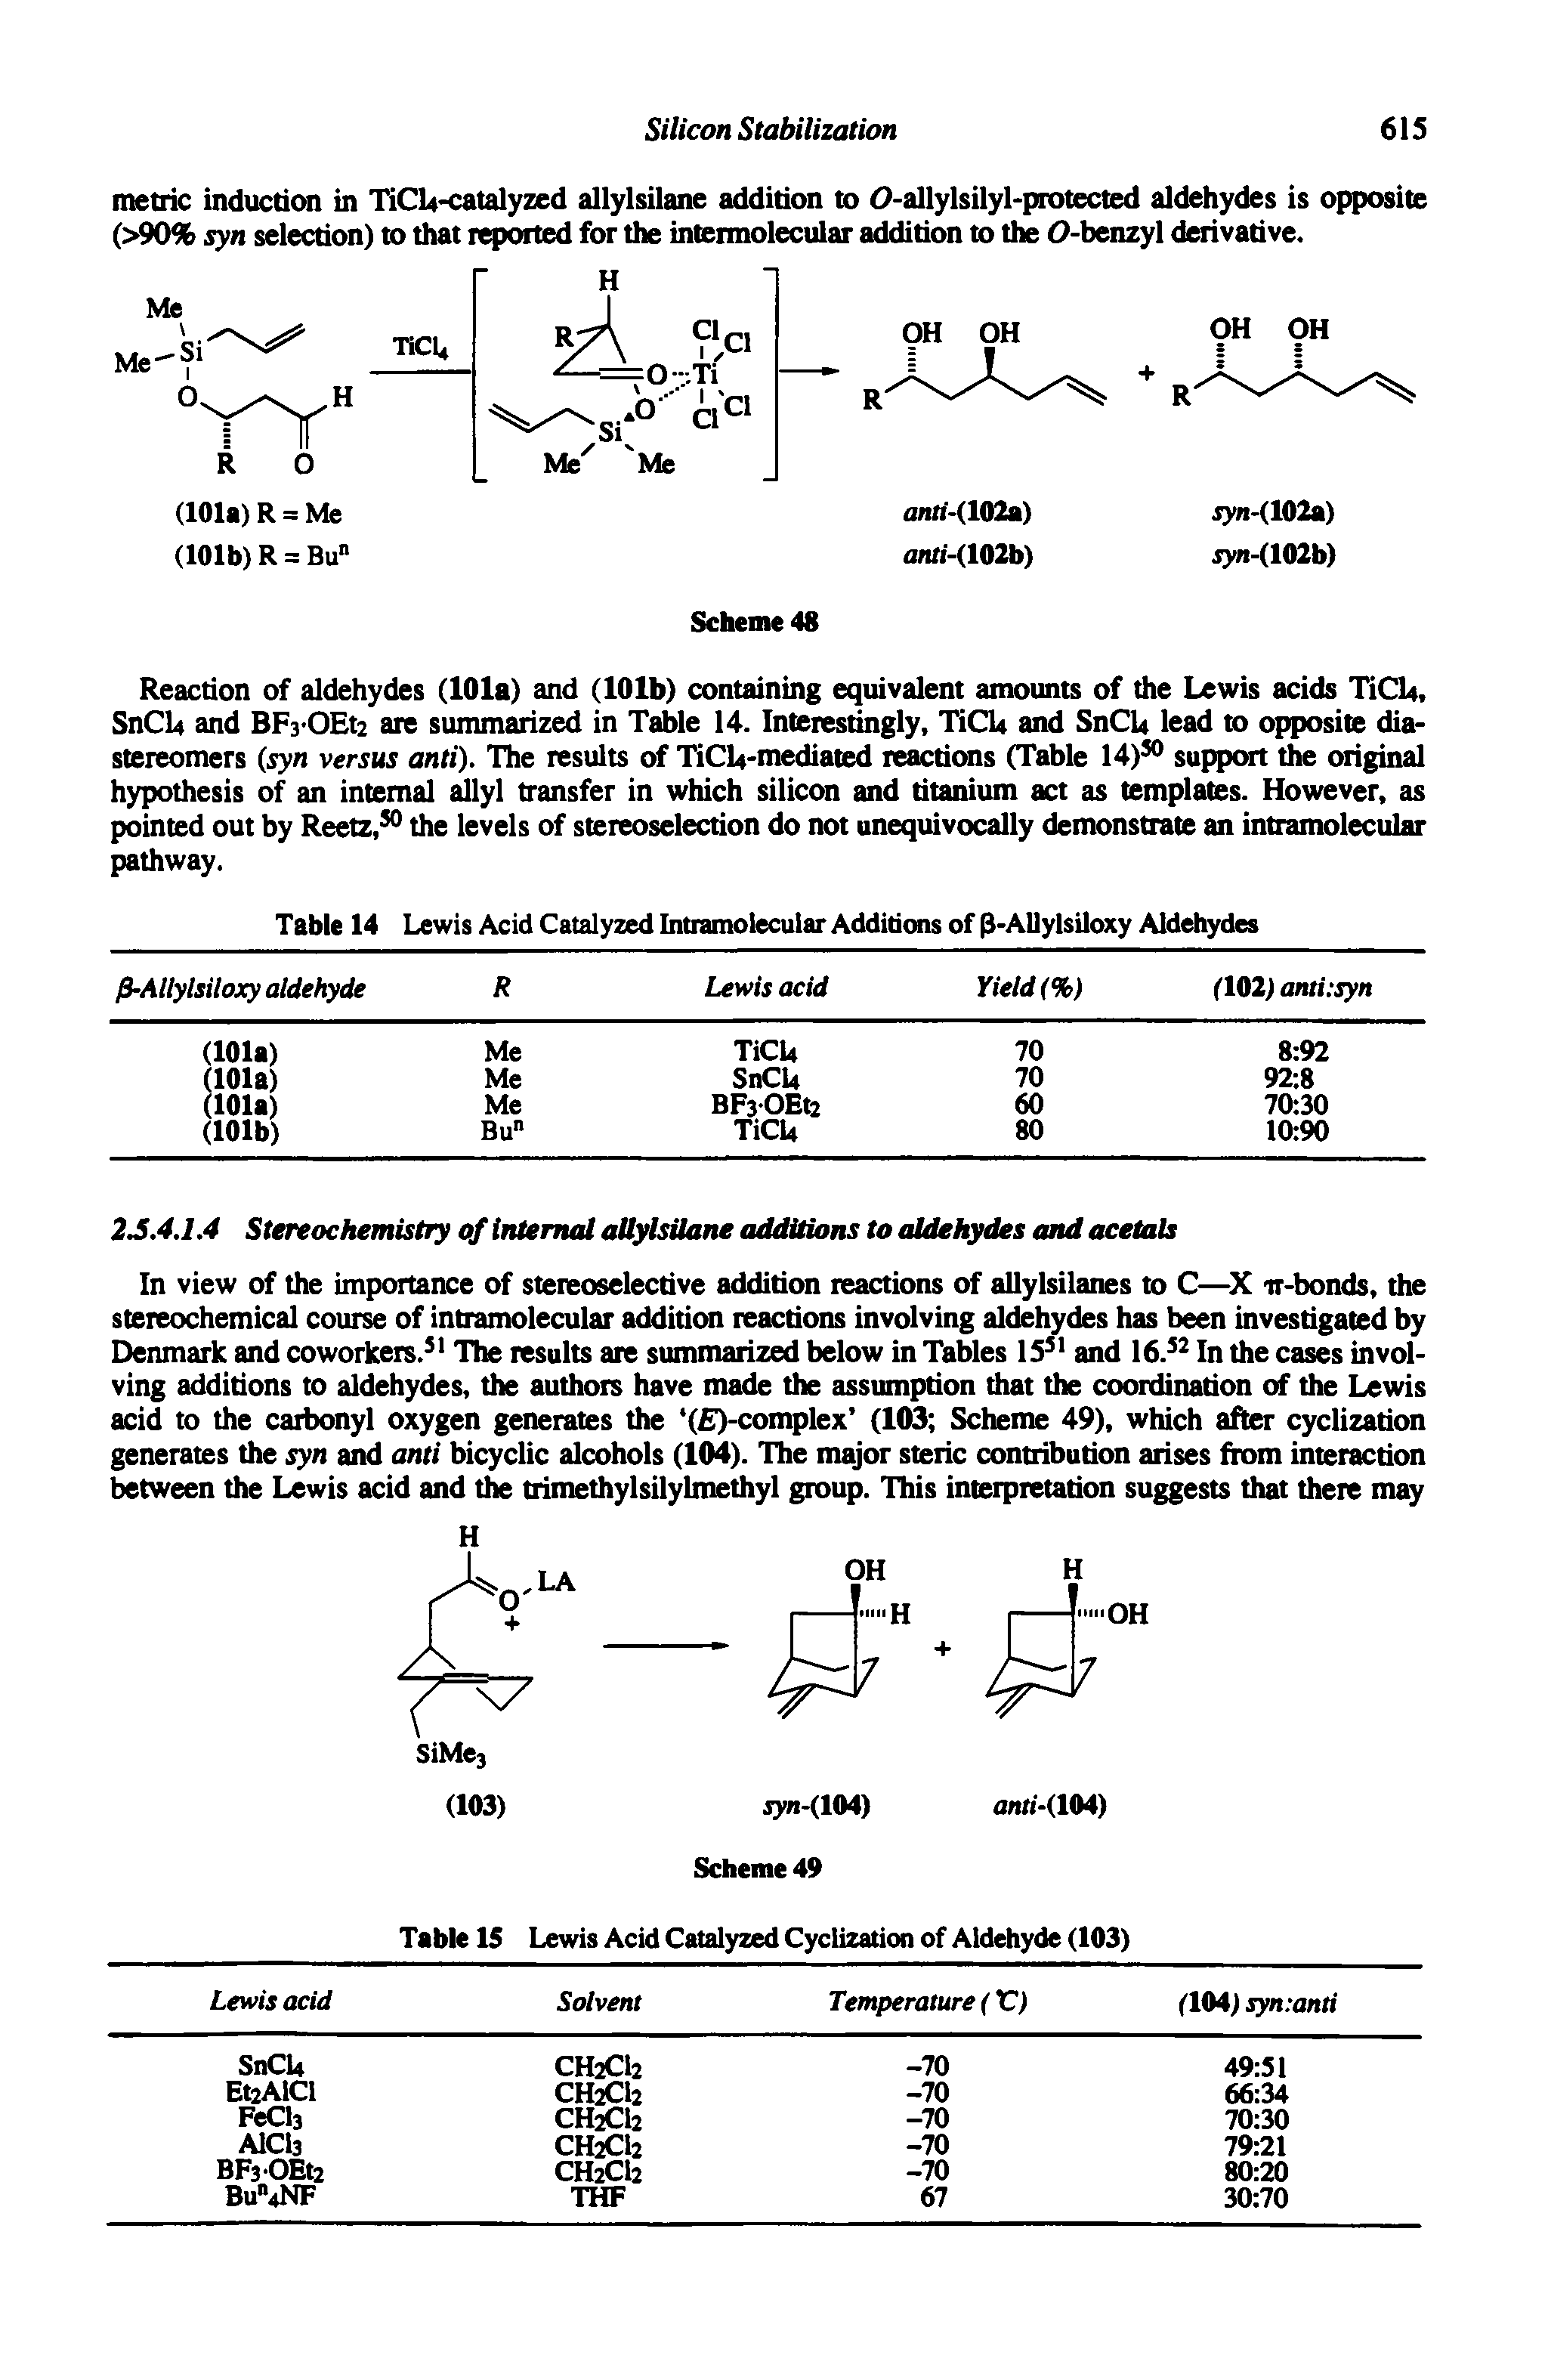 Table 15 Lewis Acid Catalyzed Cyclization of Aldehyde (103)...